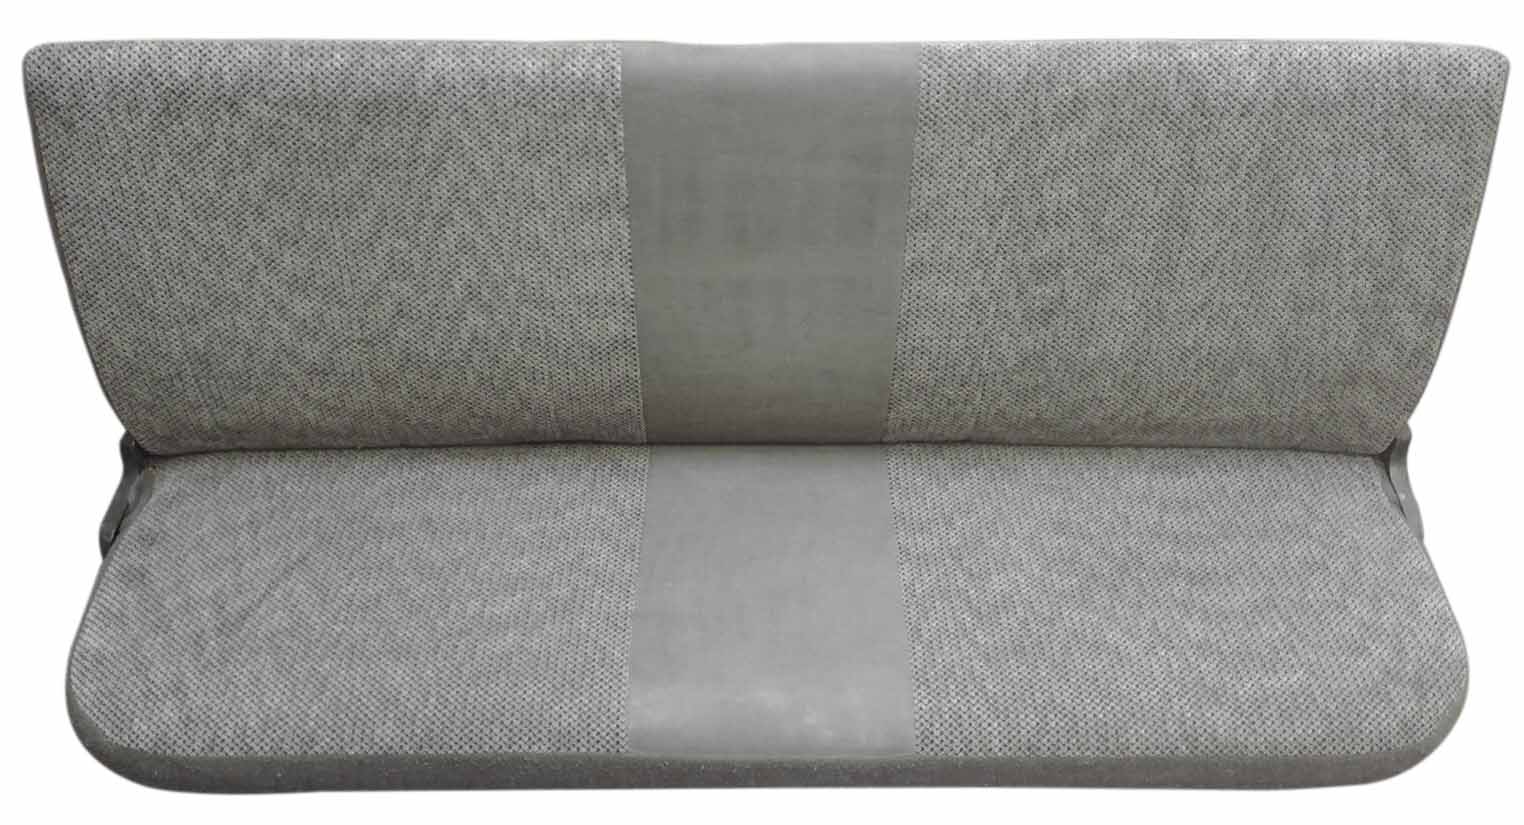 2001-2002 Dodge Ram bench – Rear Seat Cover